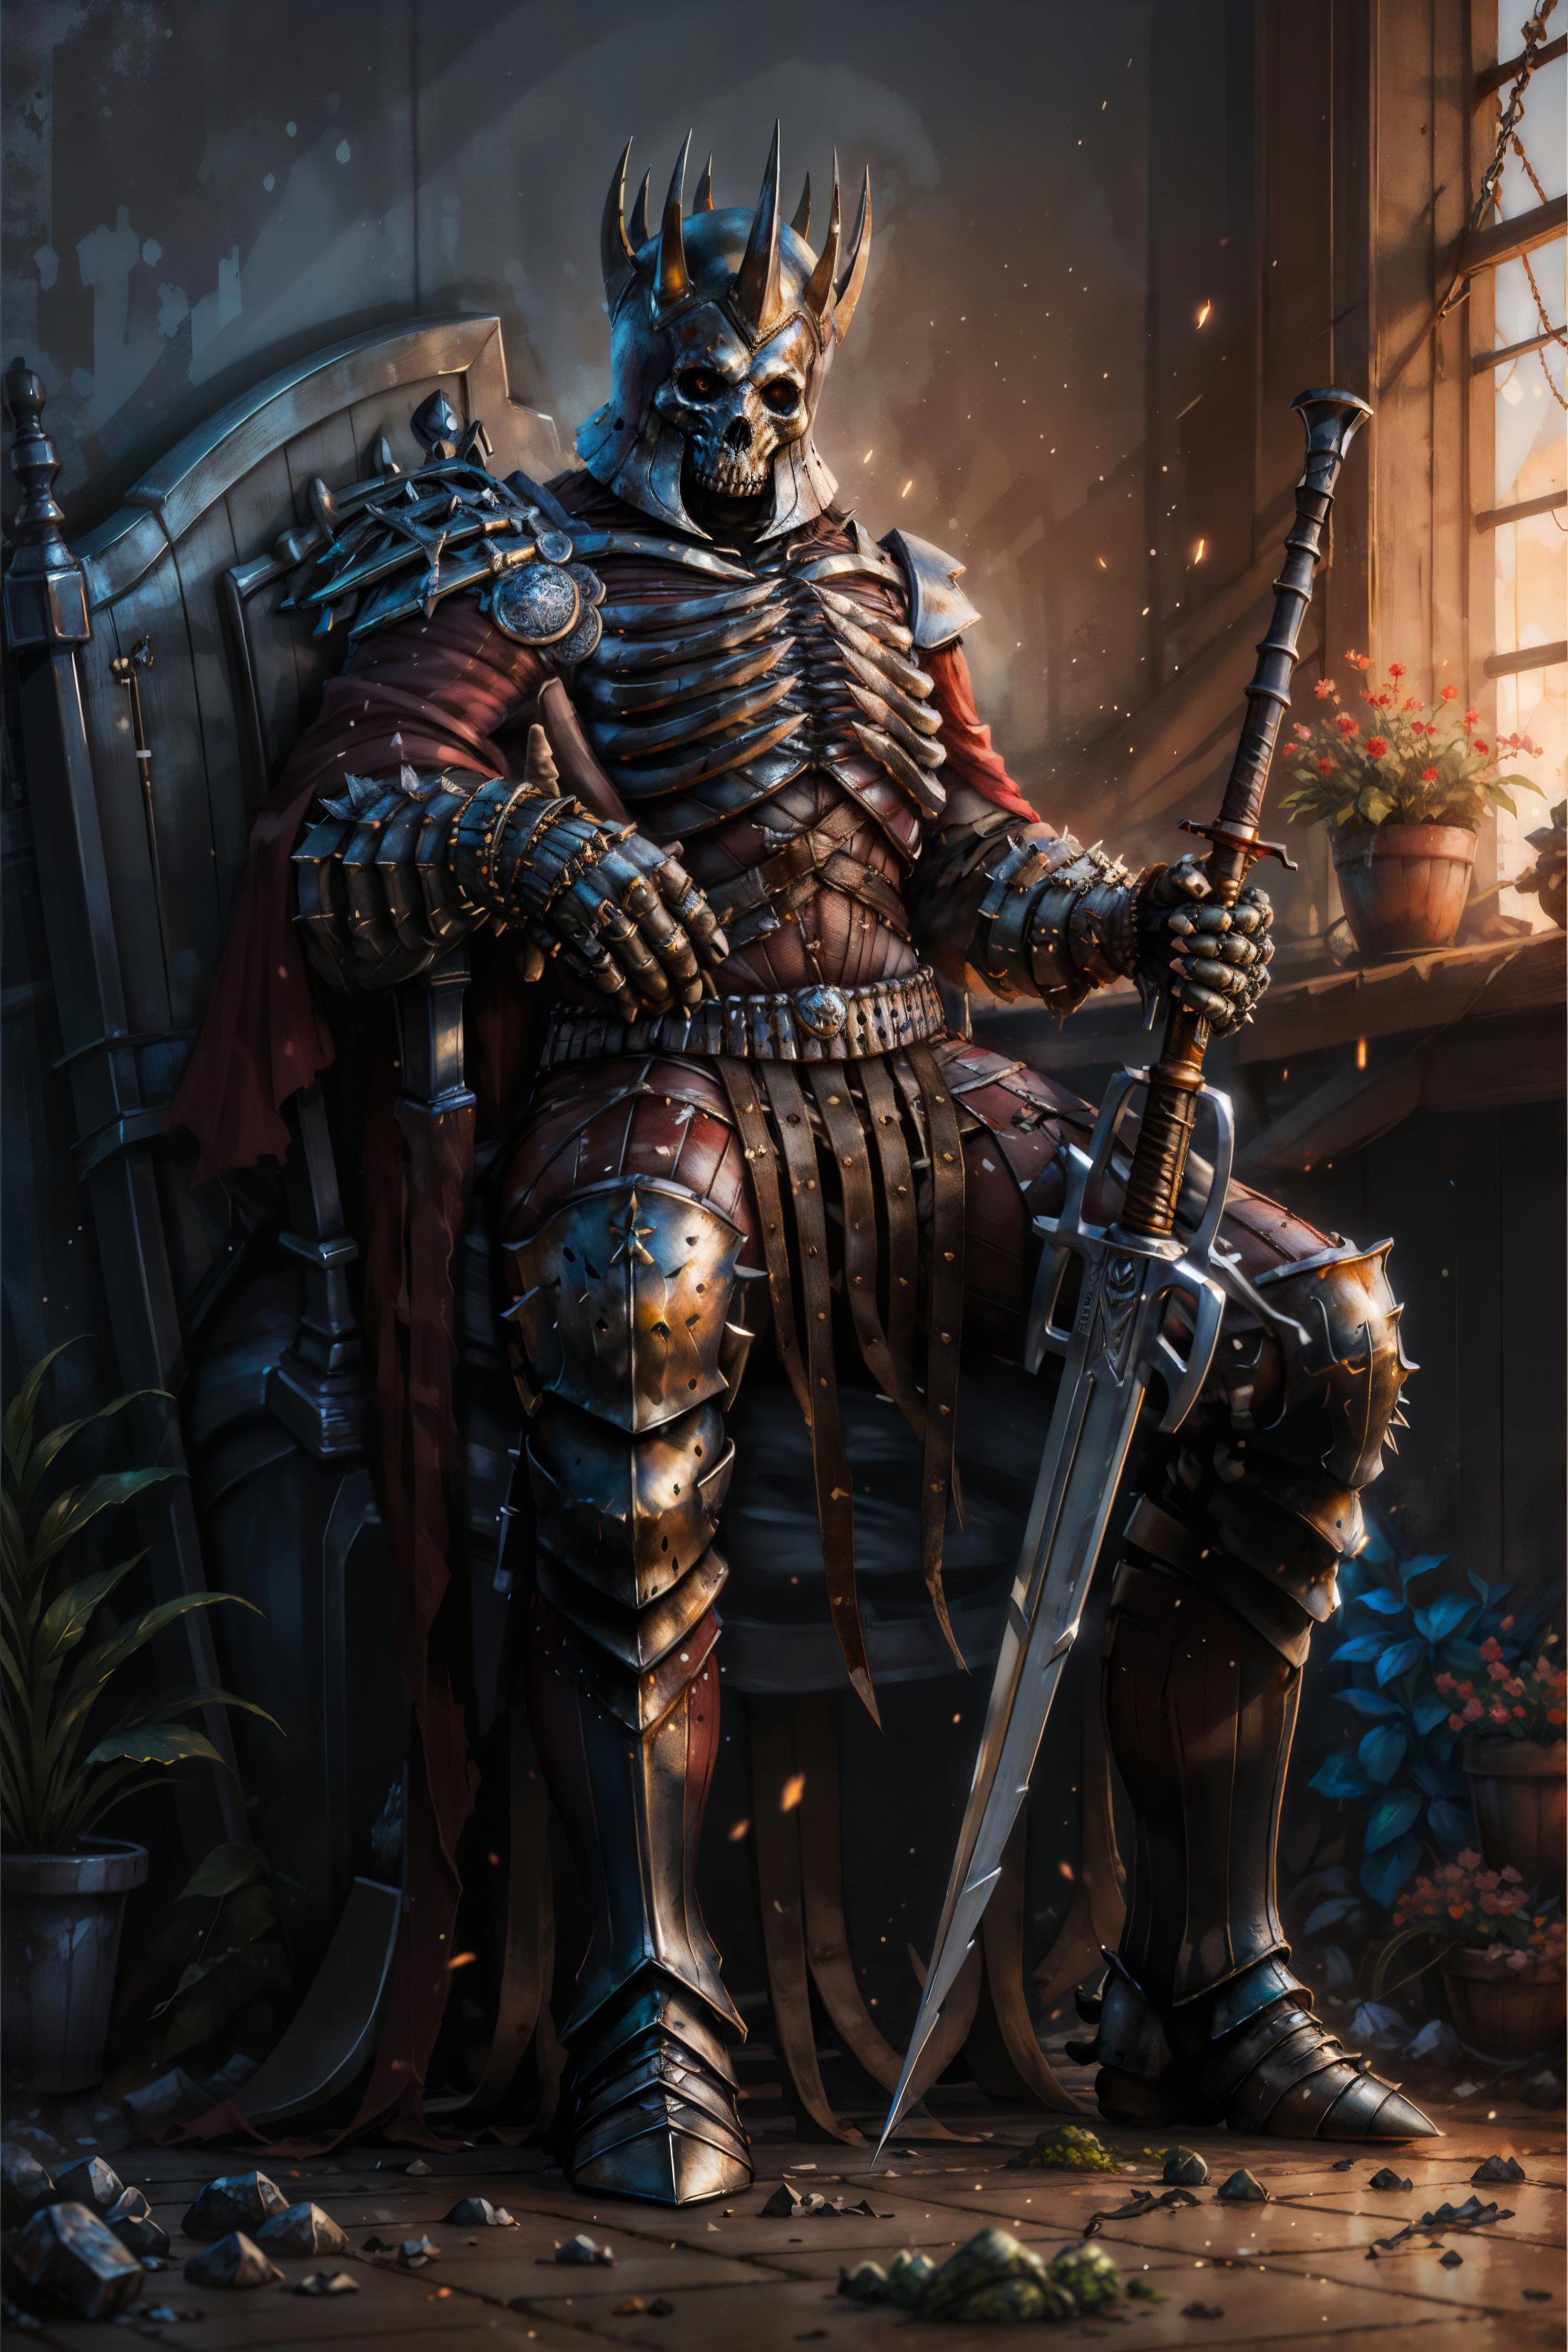 Eredin | The Witcher 3 : Wild Hunt image by soul3142